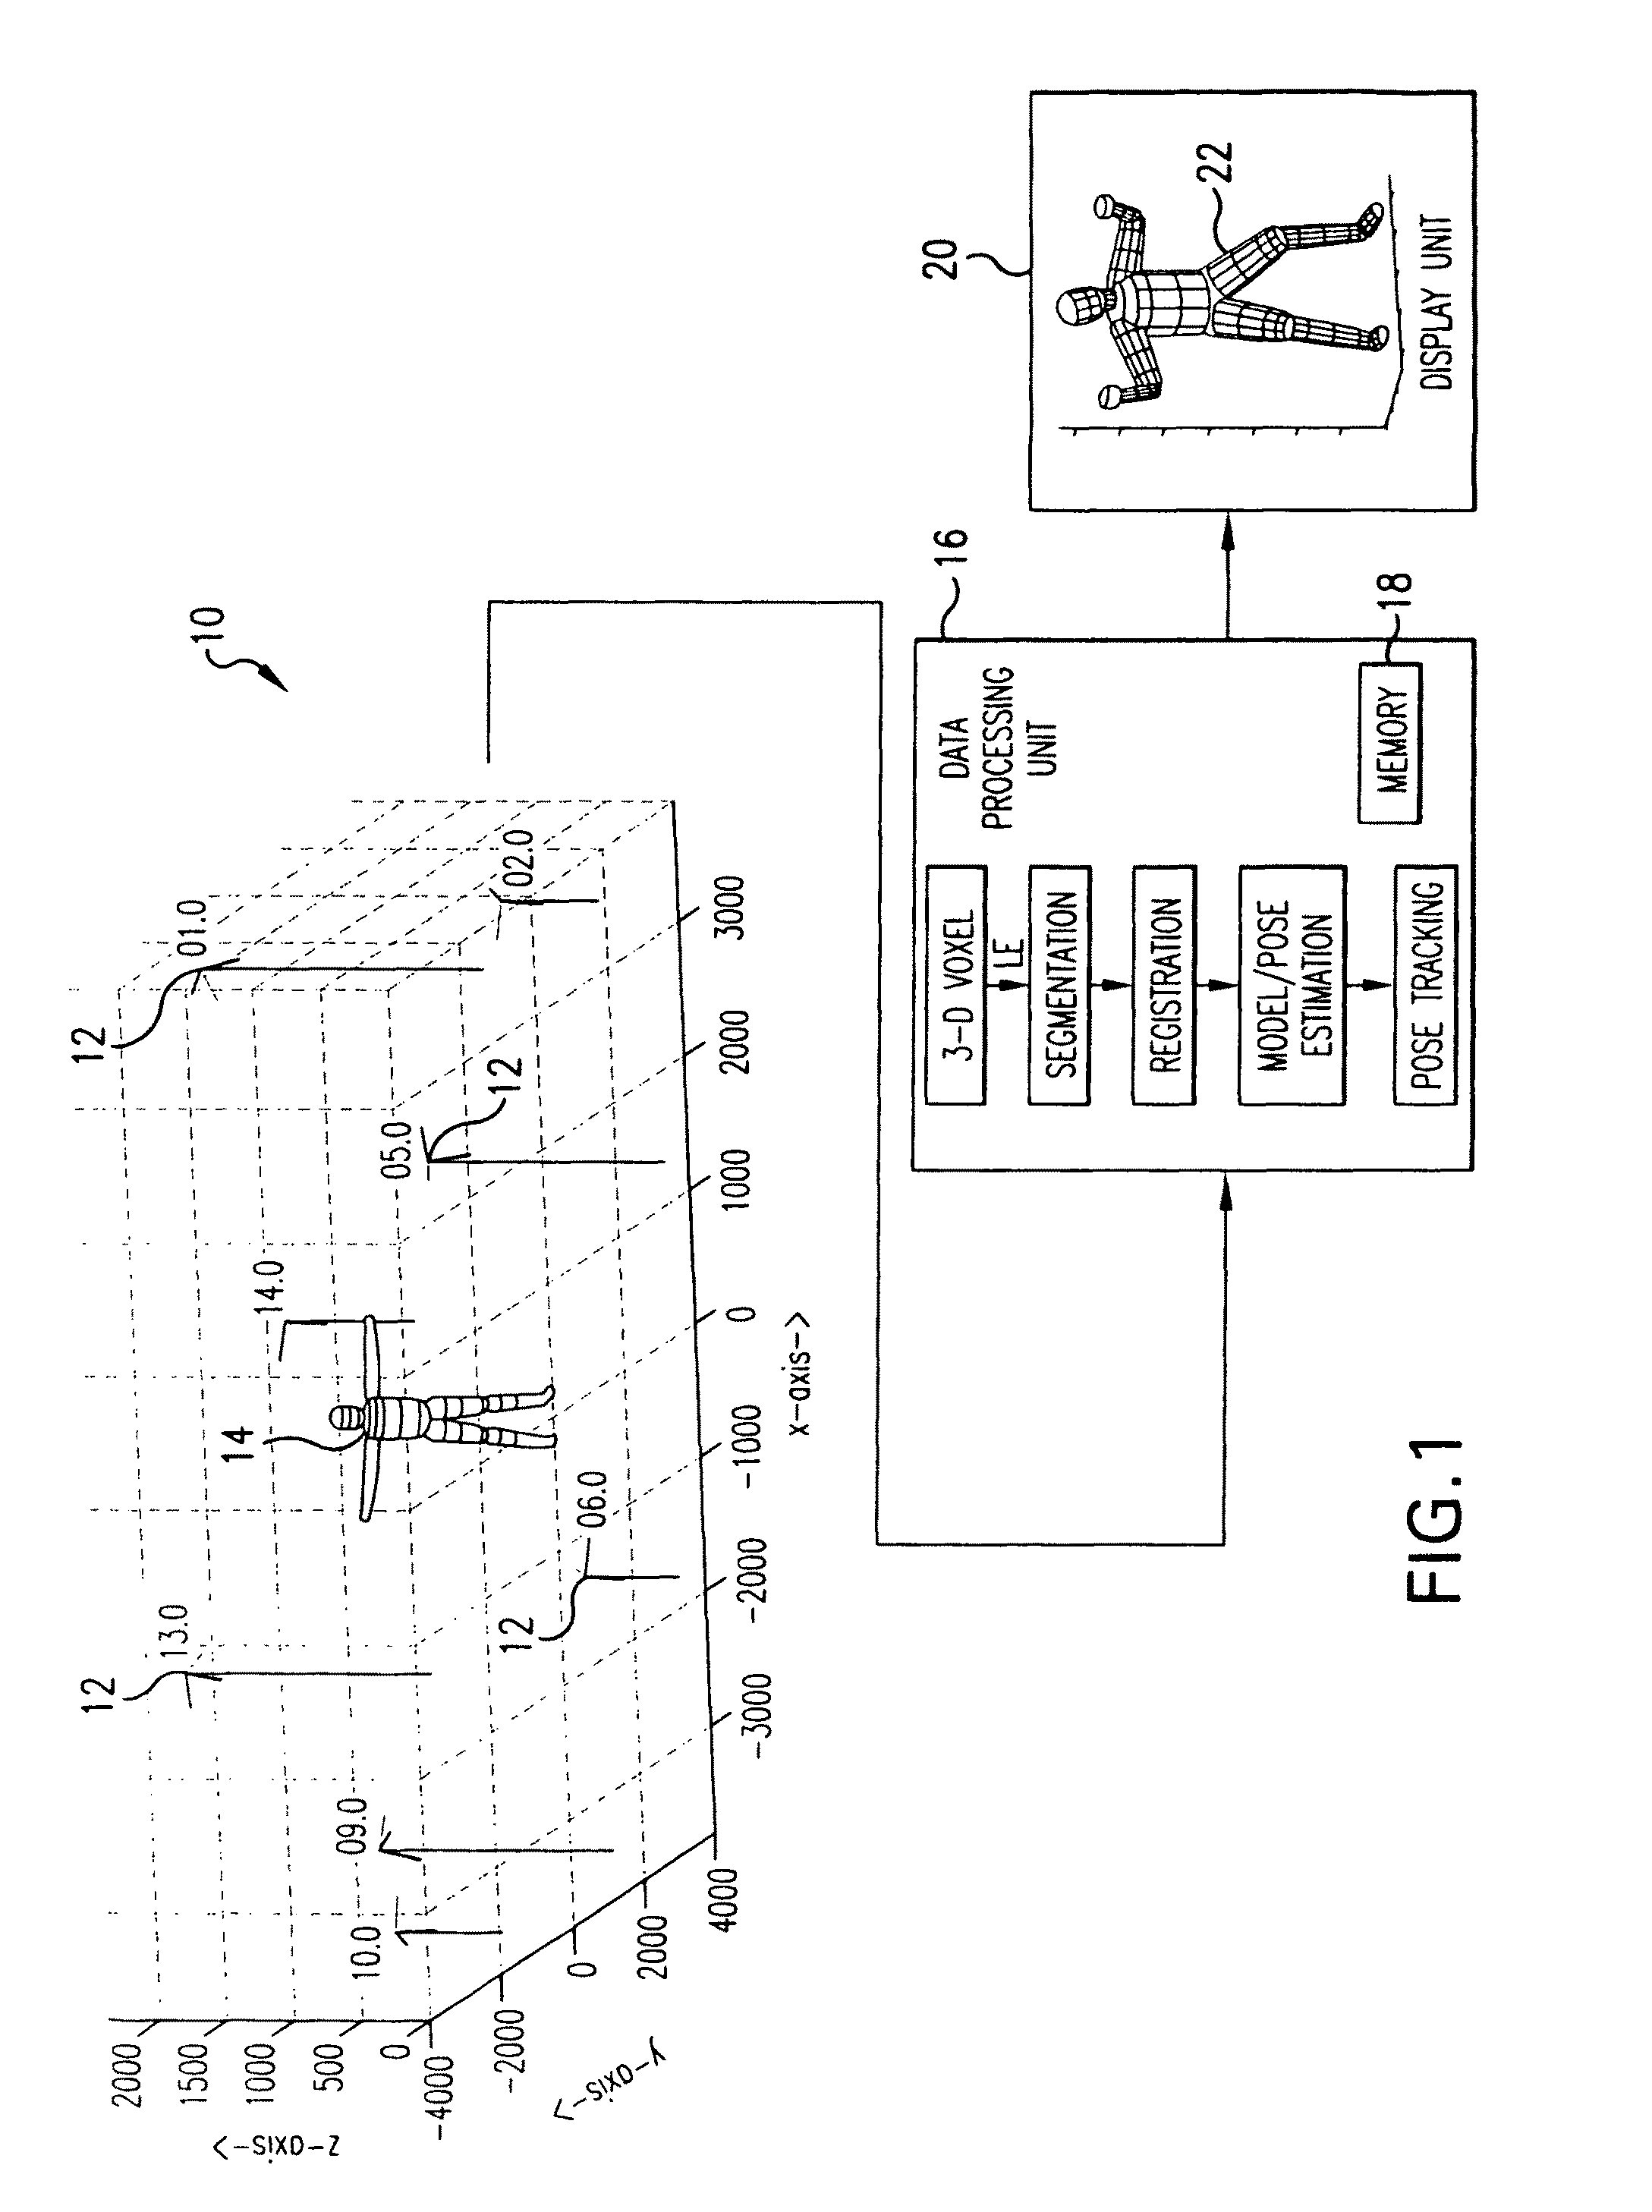 Method and system for markerless motion capture using multiple cameras